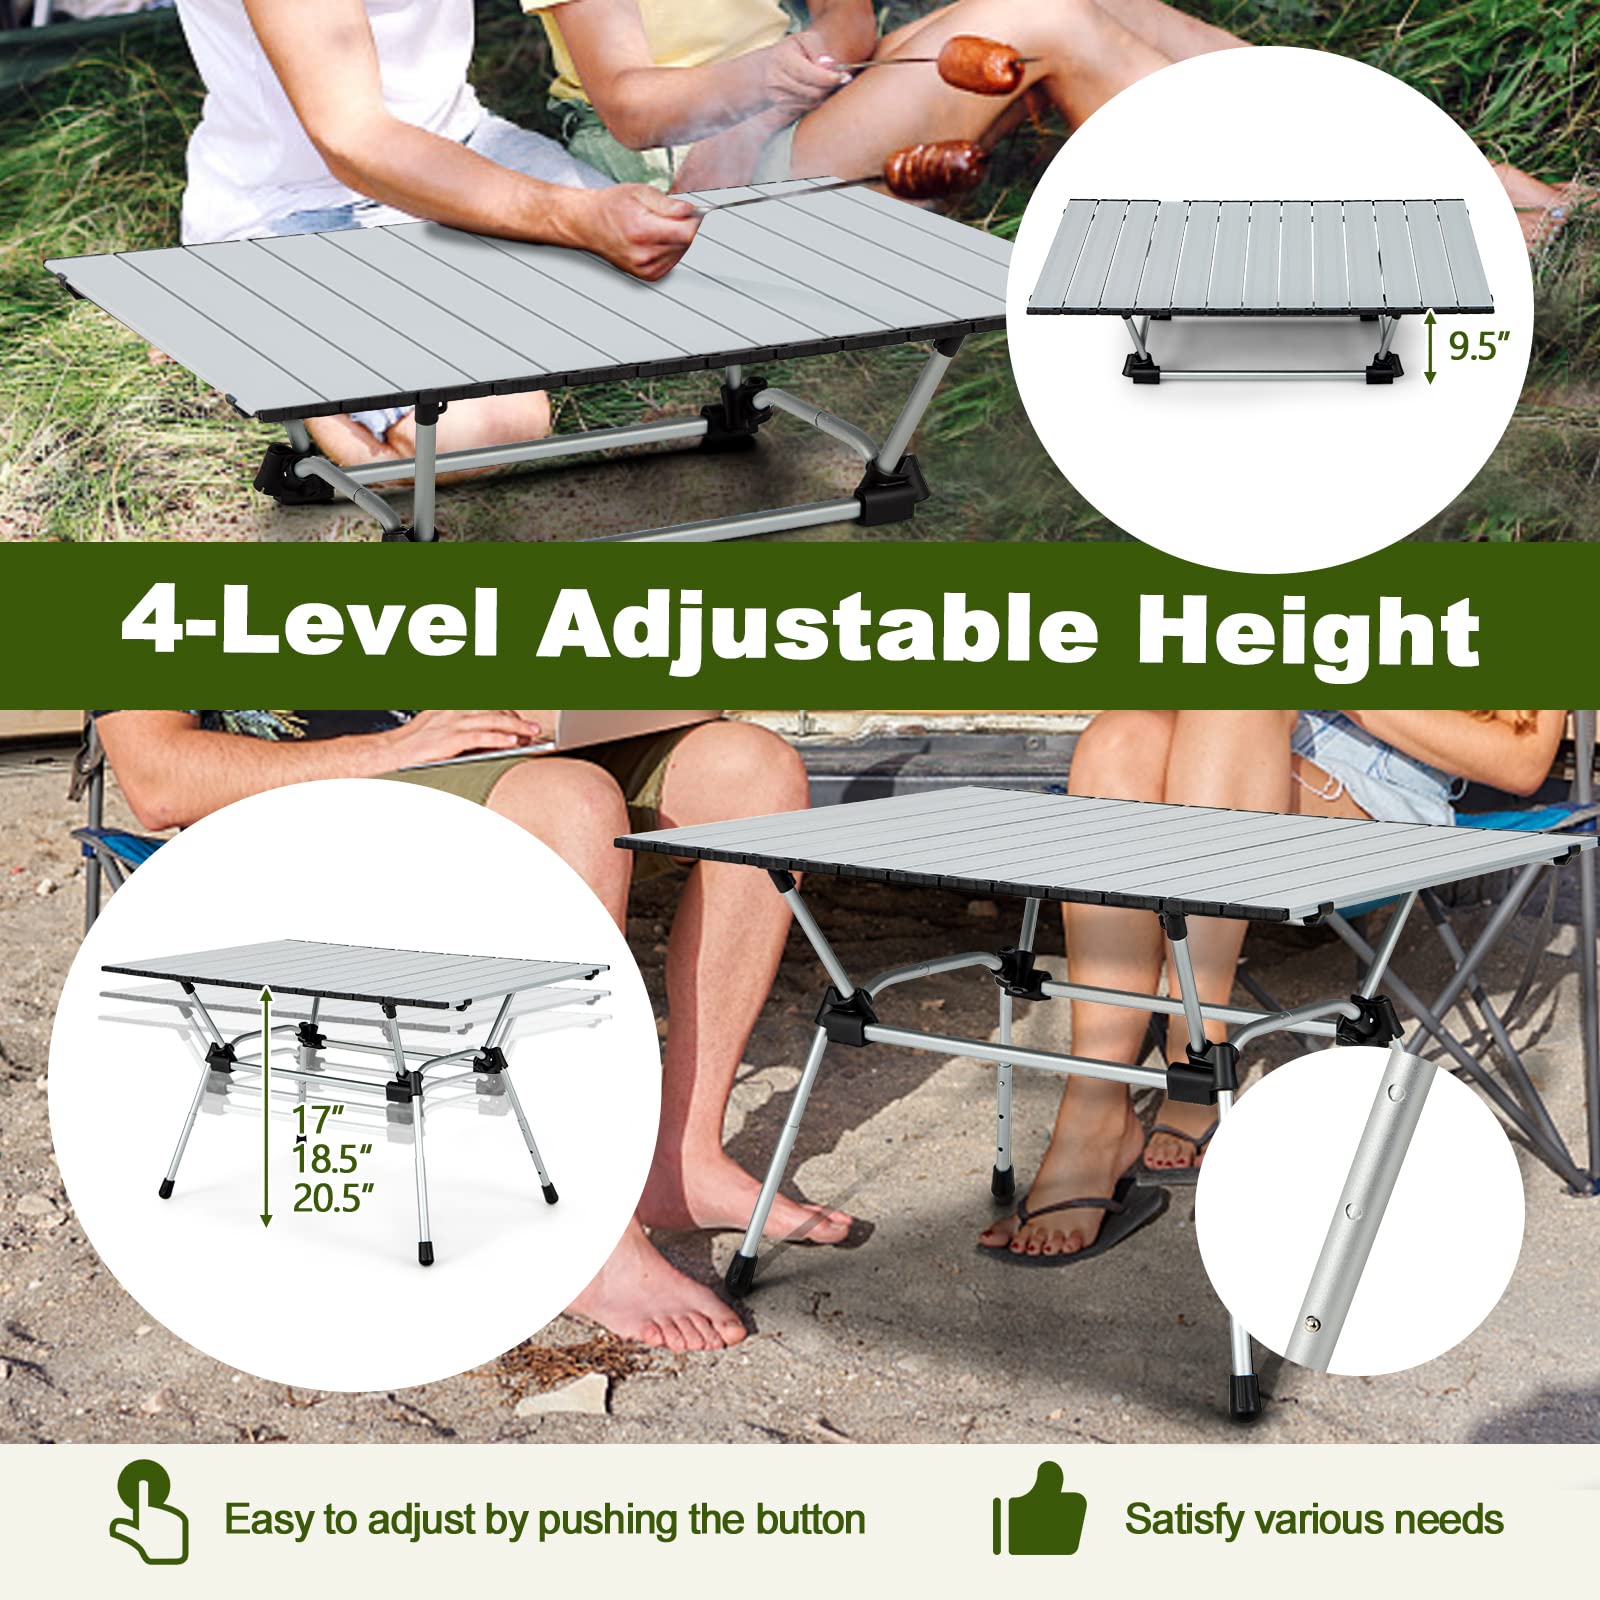 Giantex Folding Camping Table, Heavy-Duty Outdoor Folding Table w/Carry Bag